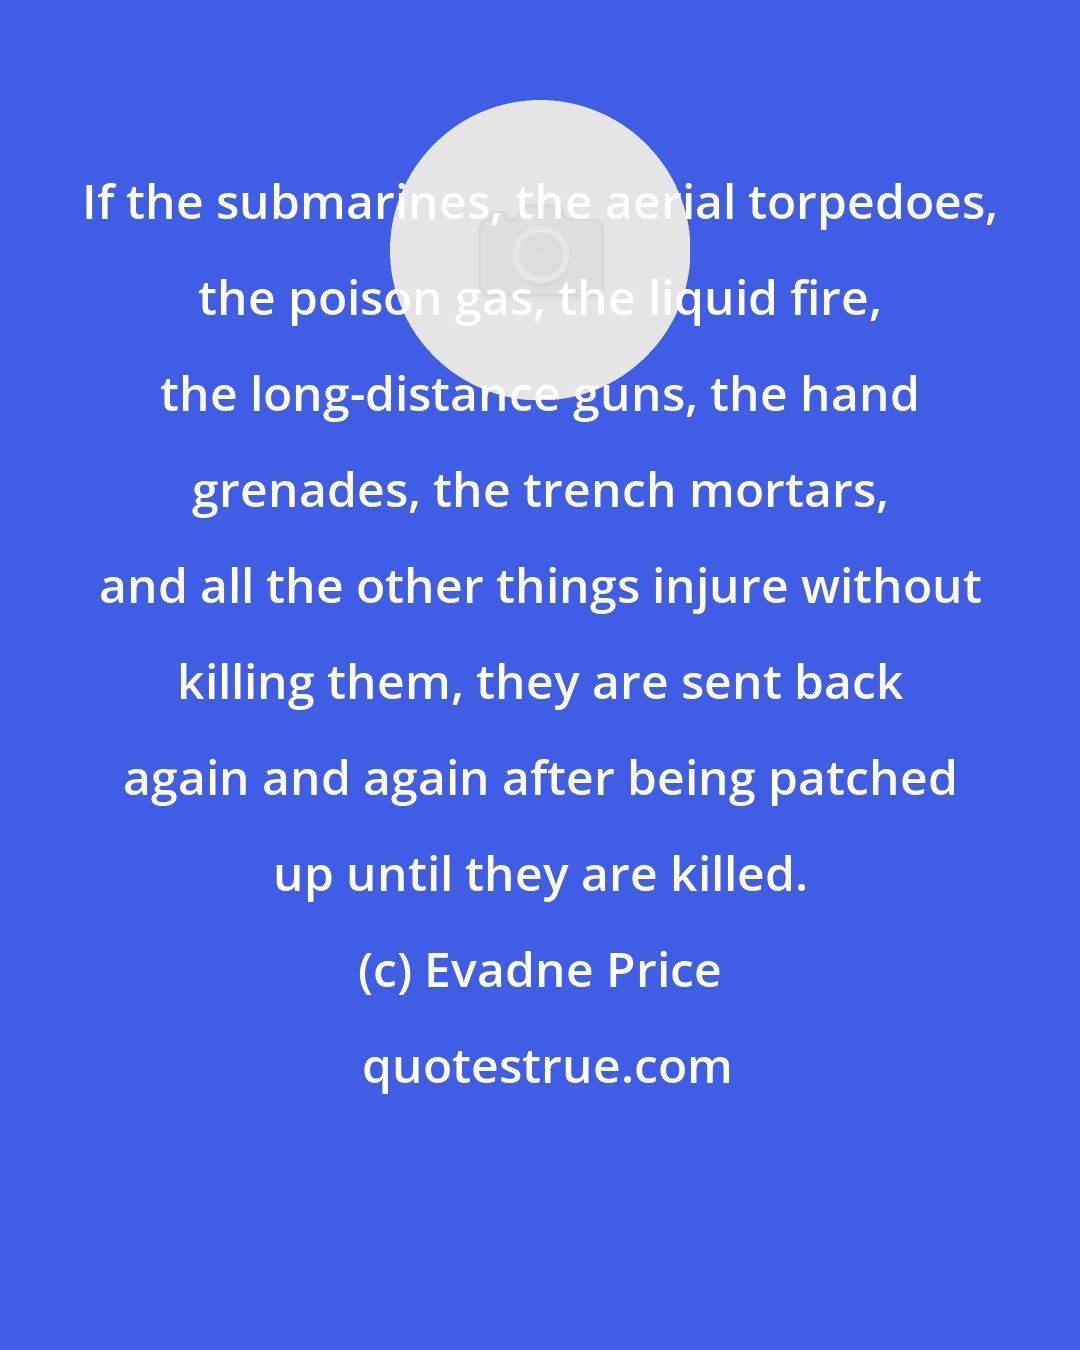 Evadne Price: If the submarines, the aerial torpedoes, the poison gas, the liquid fire, the long-distance guns, the hand grenades, the trench mortars, and all the other things injure without killing them, they are sent back again and again after being patched up until they are killed.